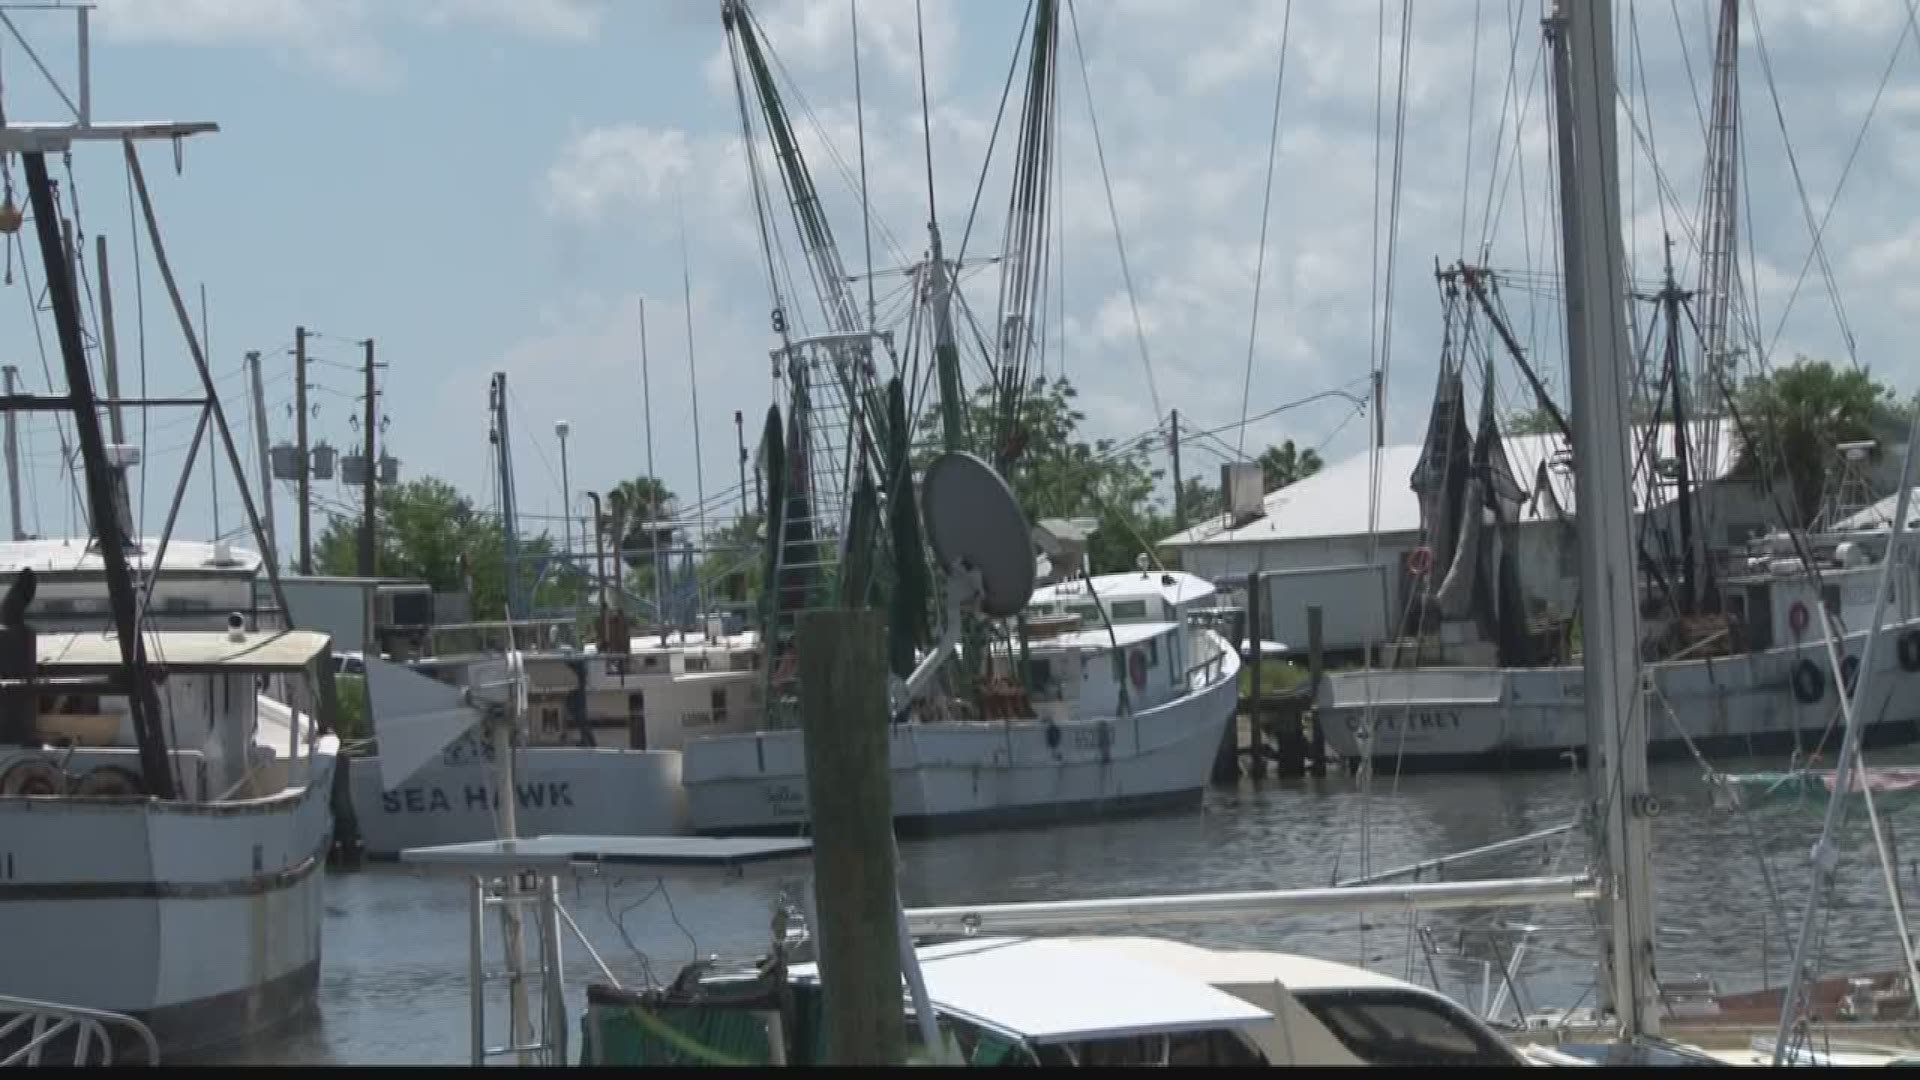 Right now, most waterfront properties in the city's oldest city are limited in what they can do. But a plan is underway to change that.